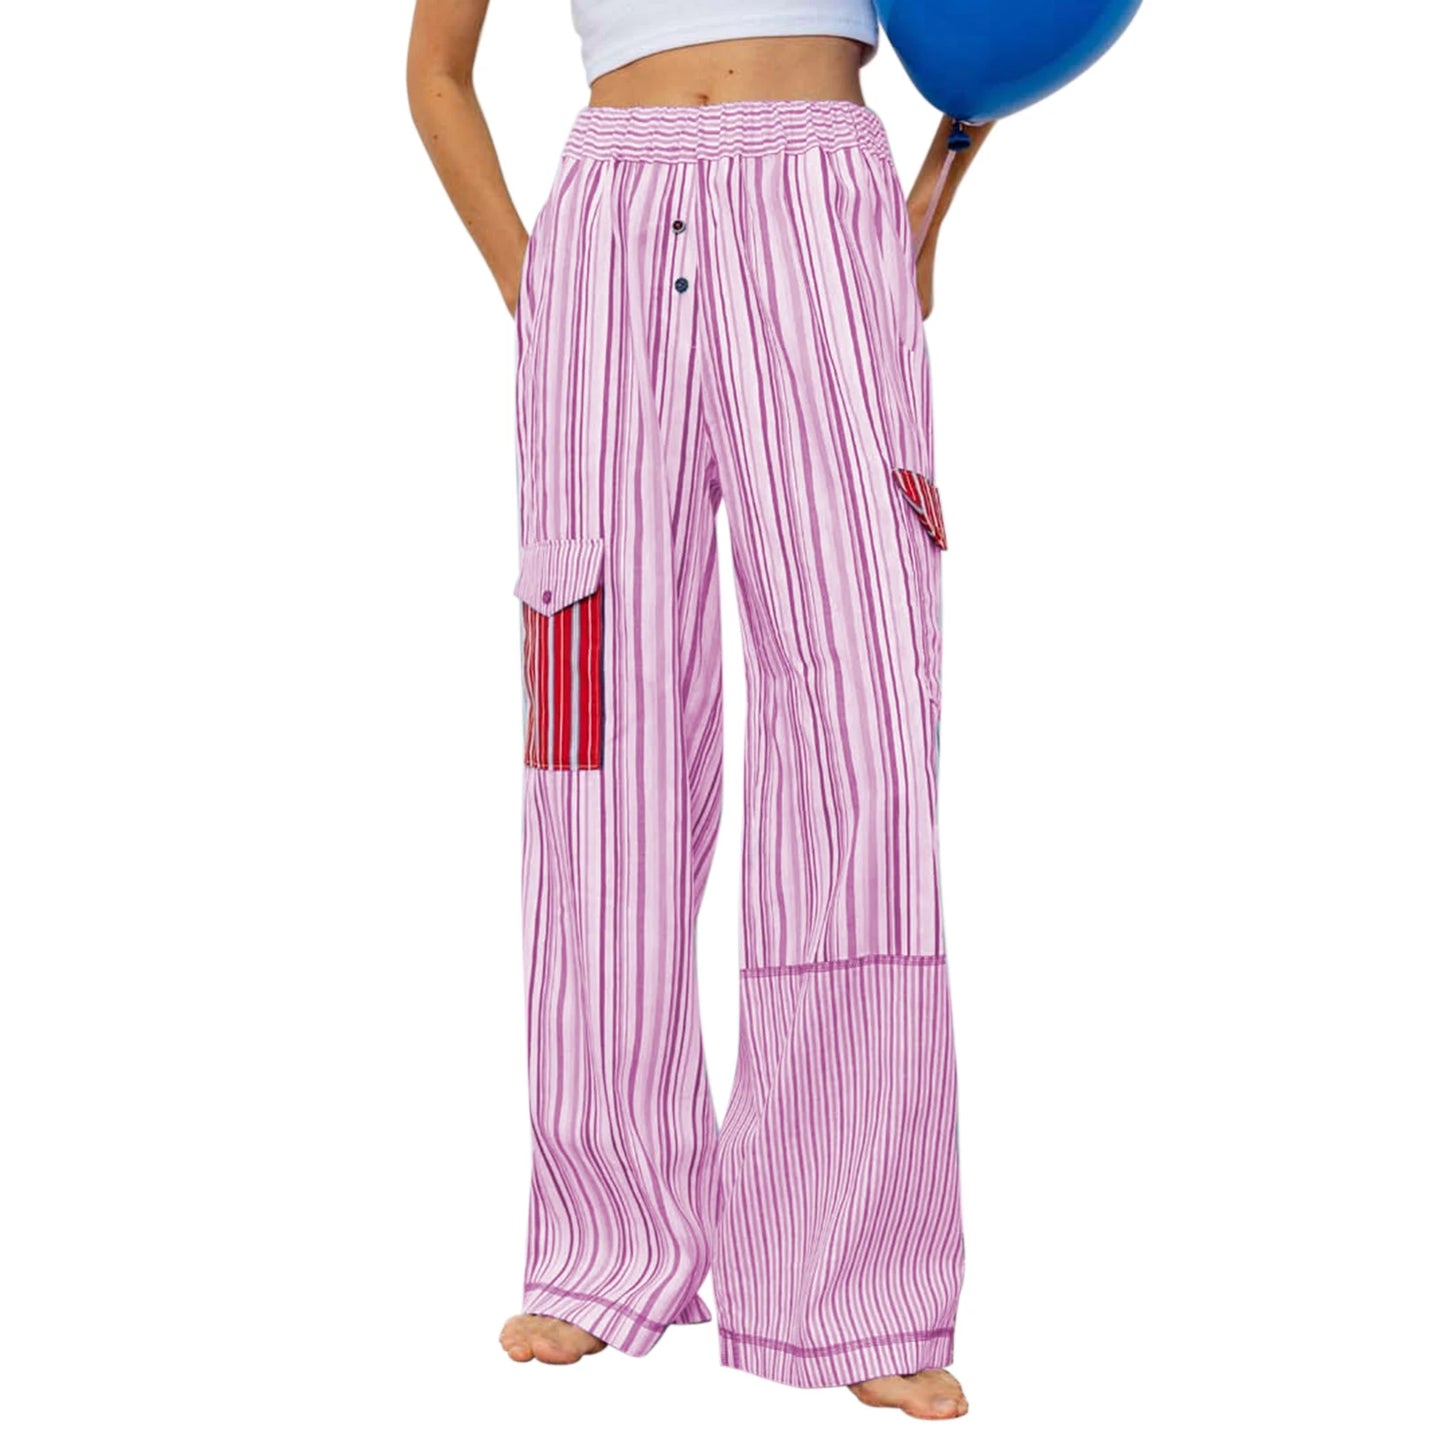 Summer Pants- Women's Patchwork Striped Lounge Pants for Beach Lounging- Pink- Chuzko Women Clothing